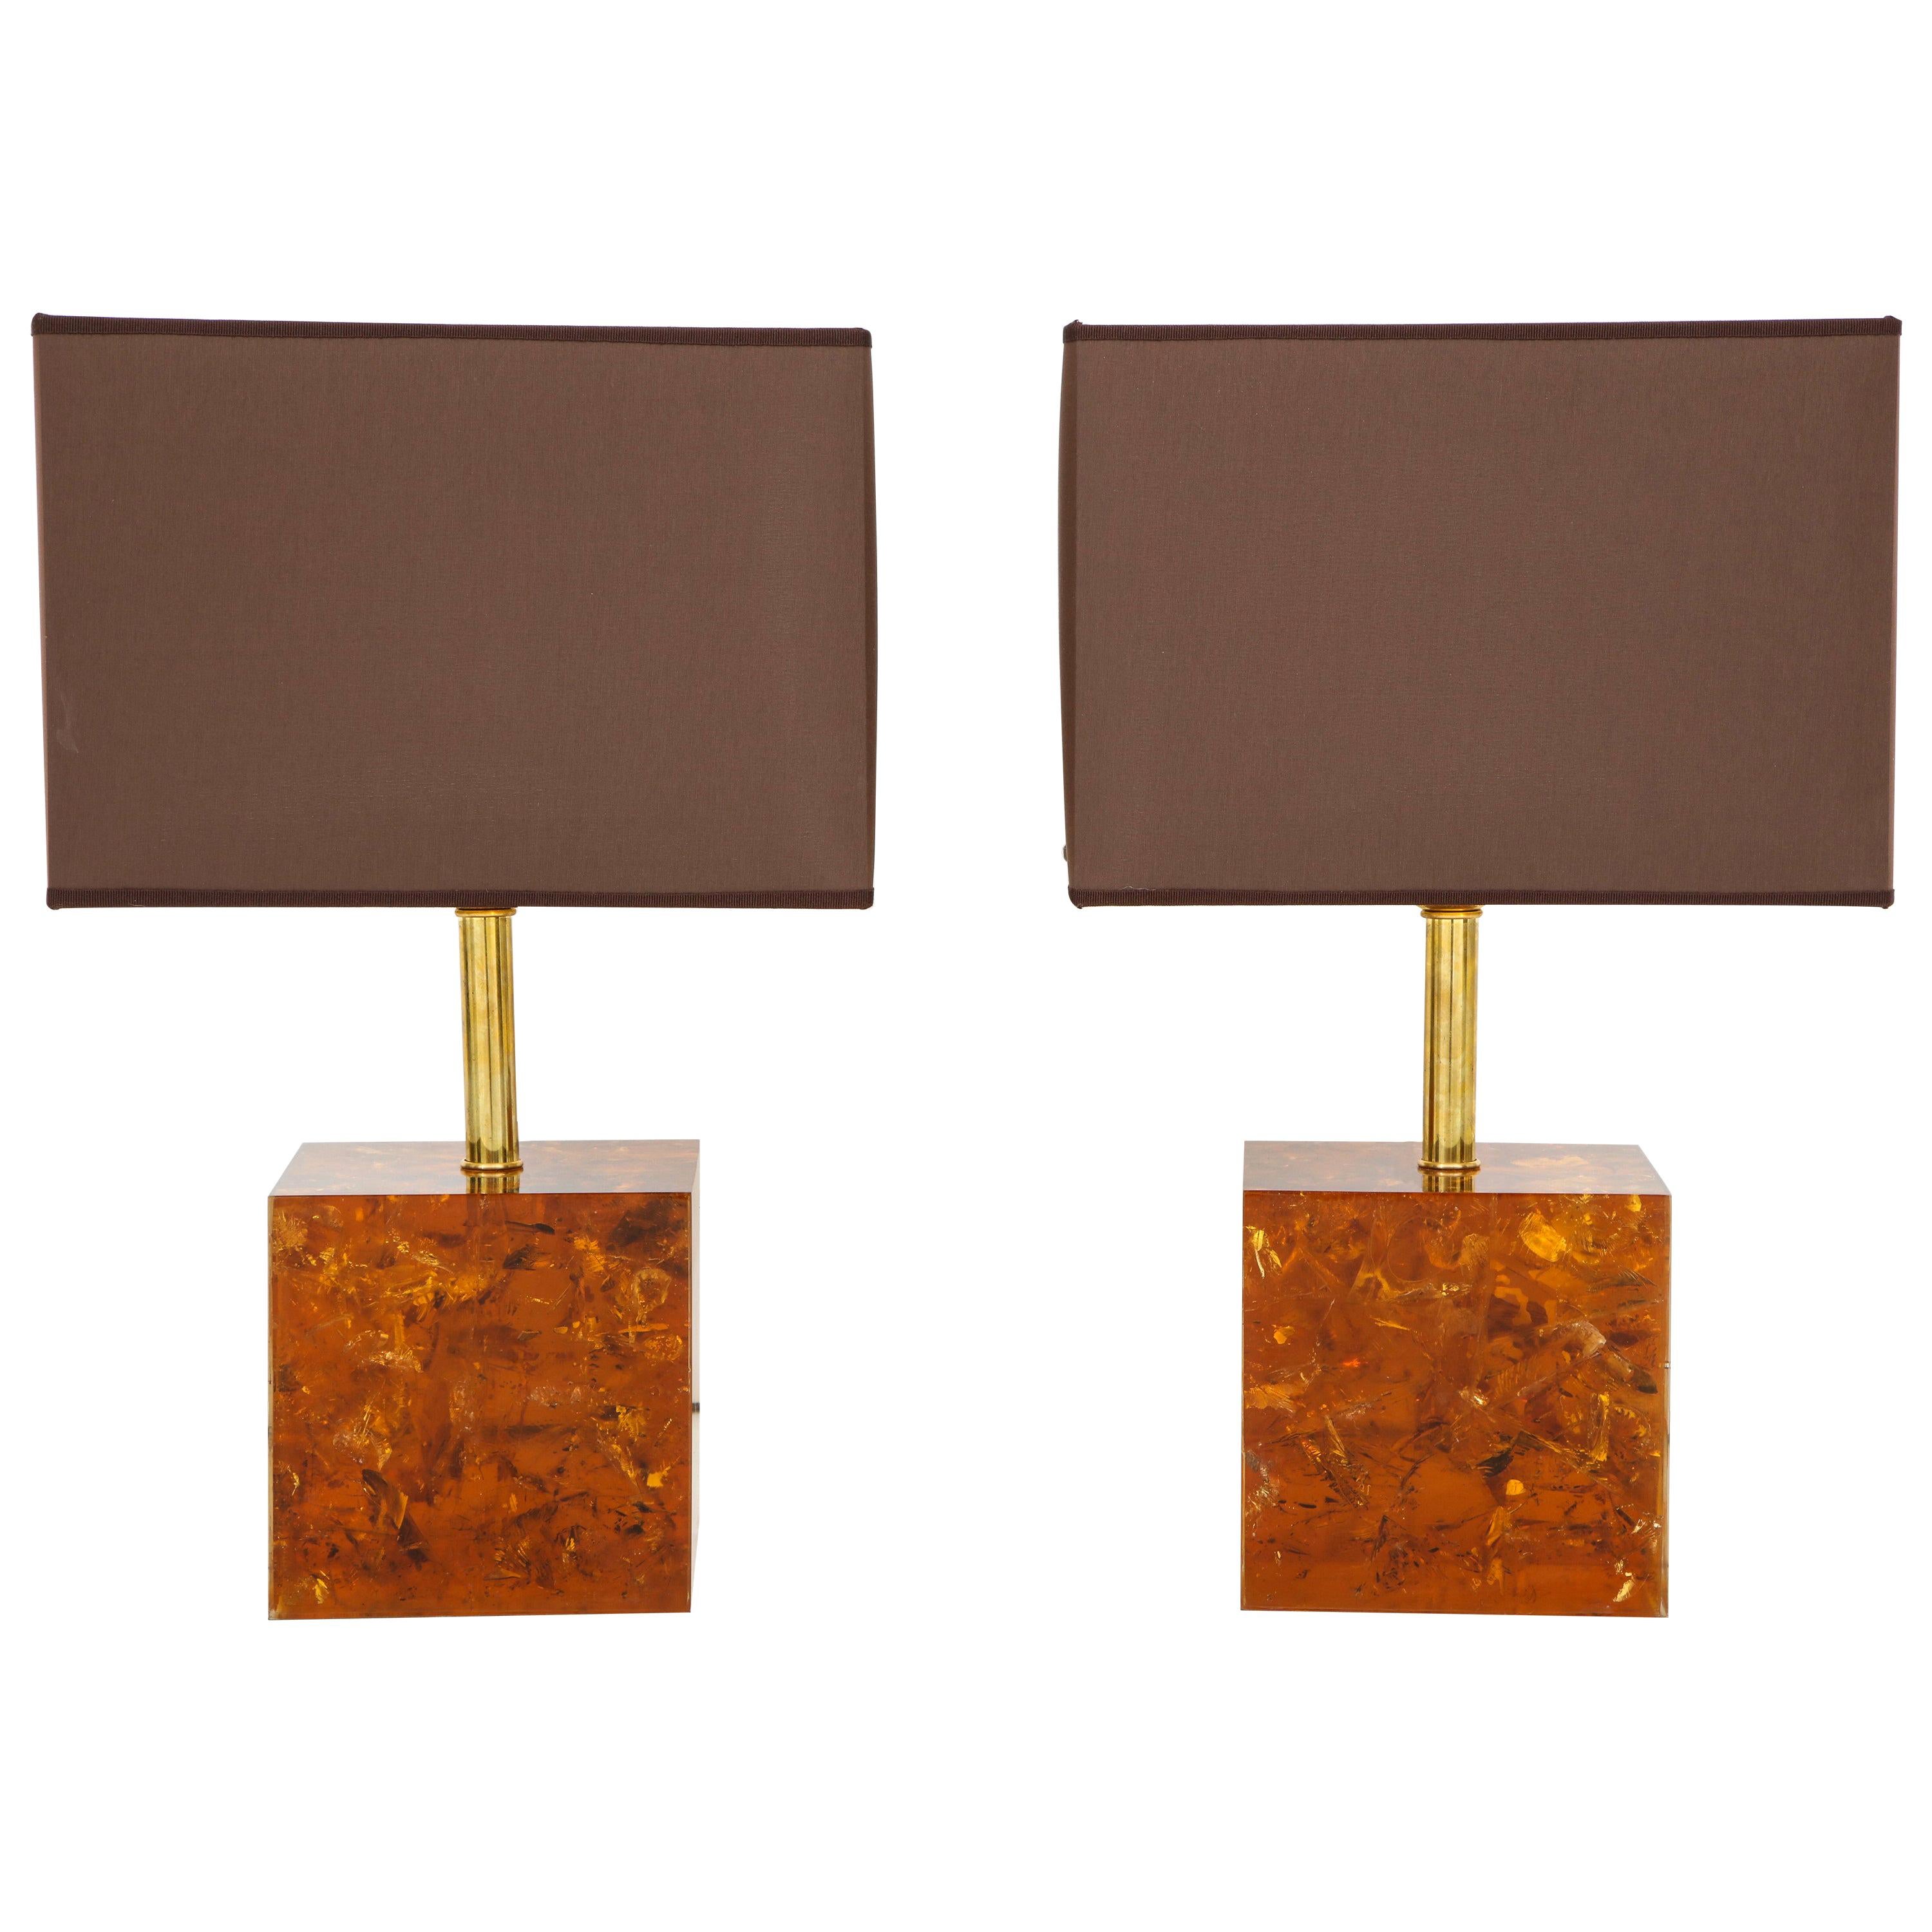 This elegant pair of tortoise shell colored cube or square base lamps were handcrafted by an artisan in Florence, Italy of resin infused with a bronze color and utilizing an artistic technique which adds texture and movement to the inside of the